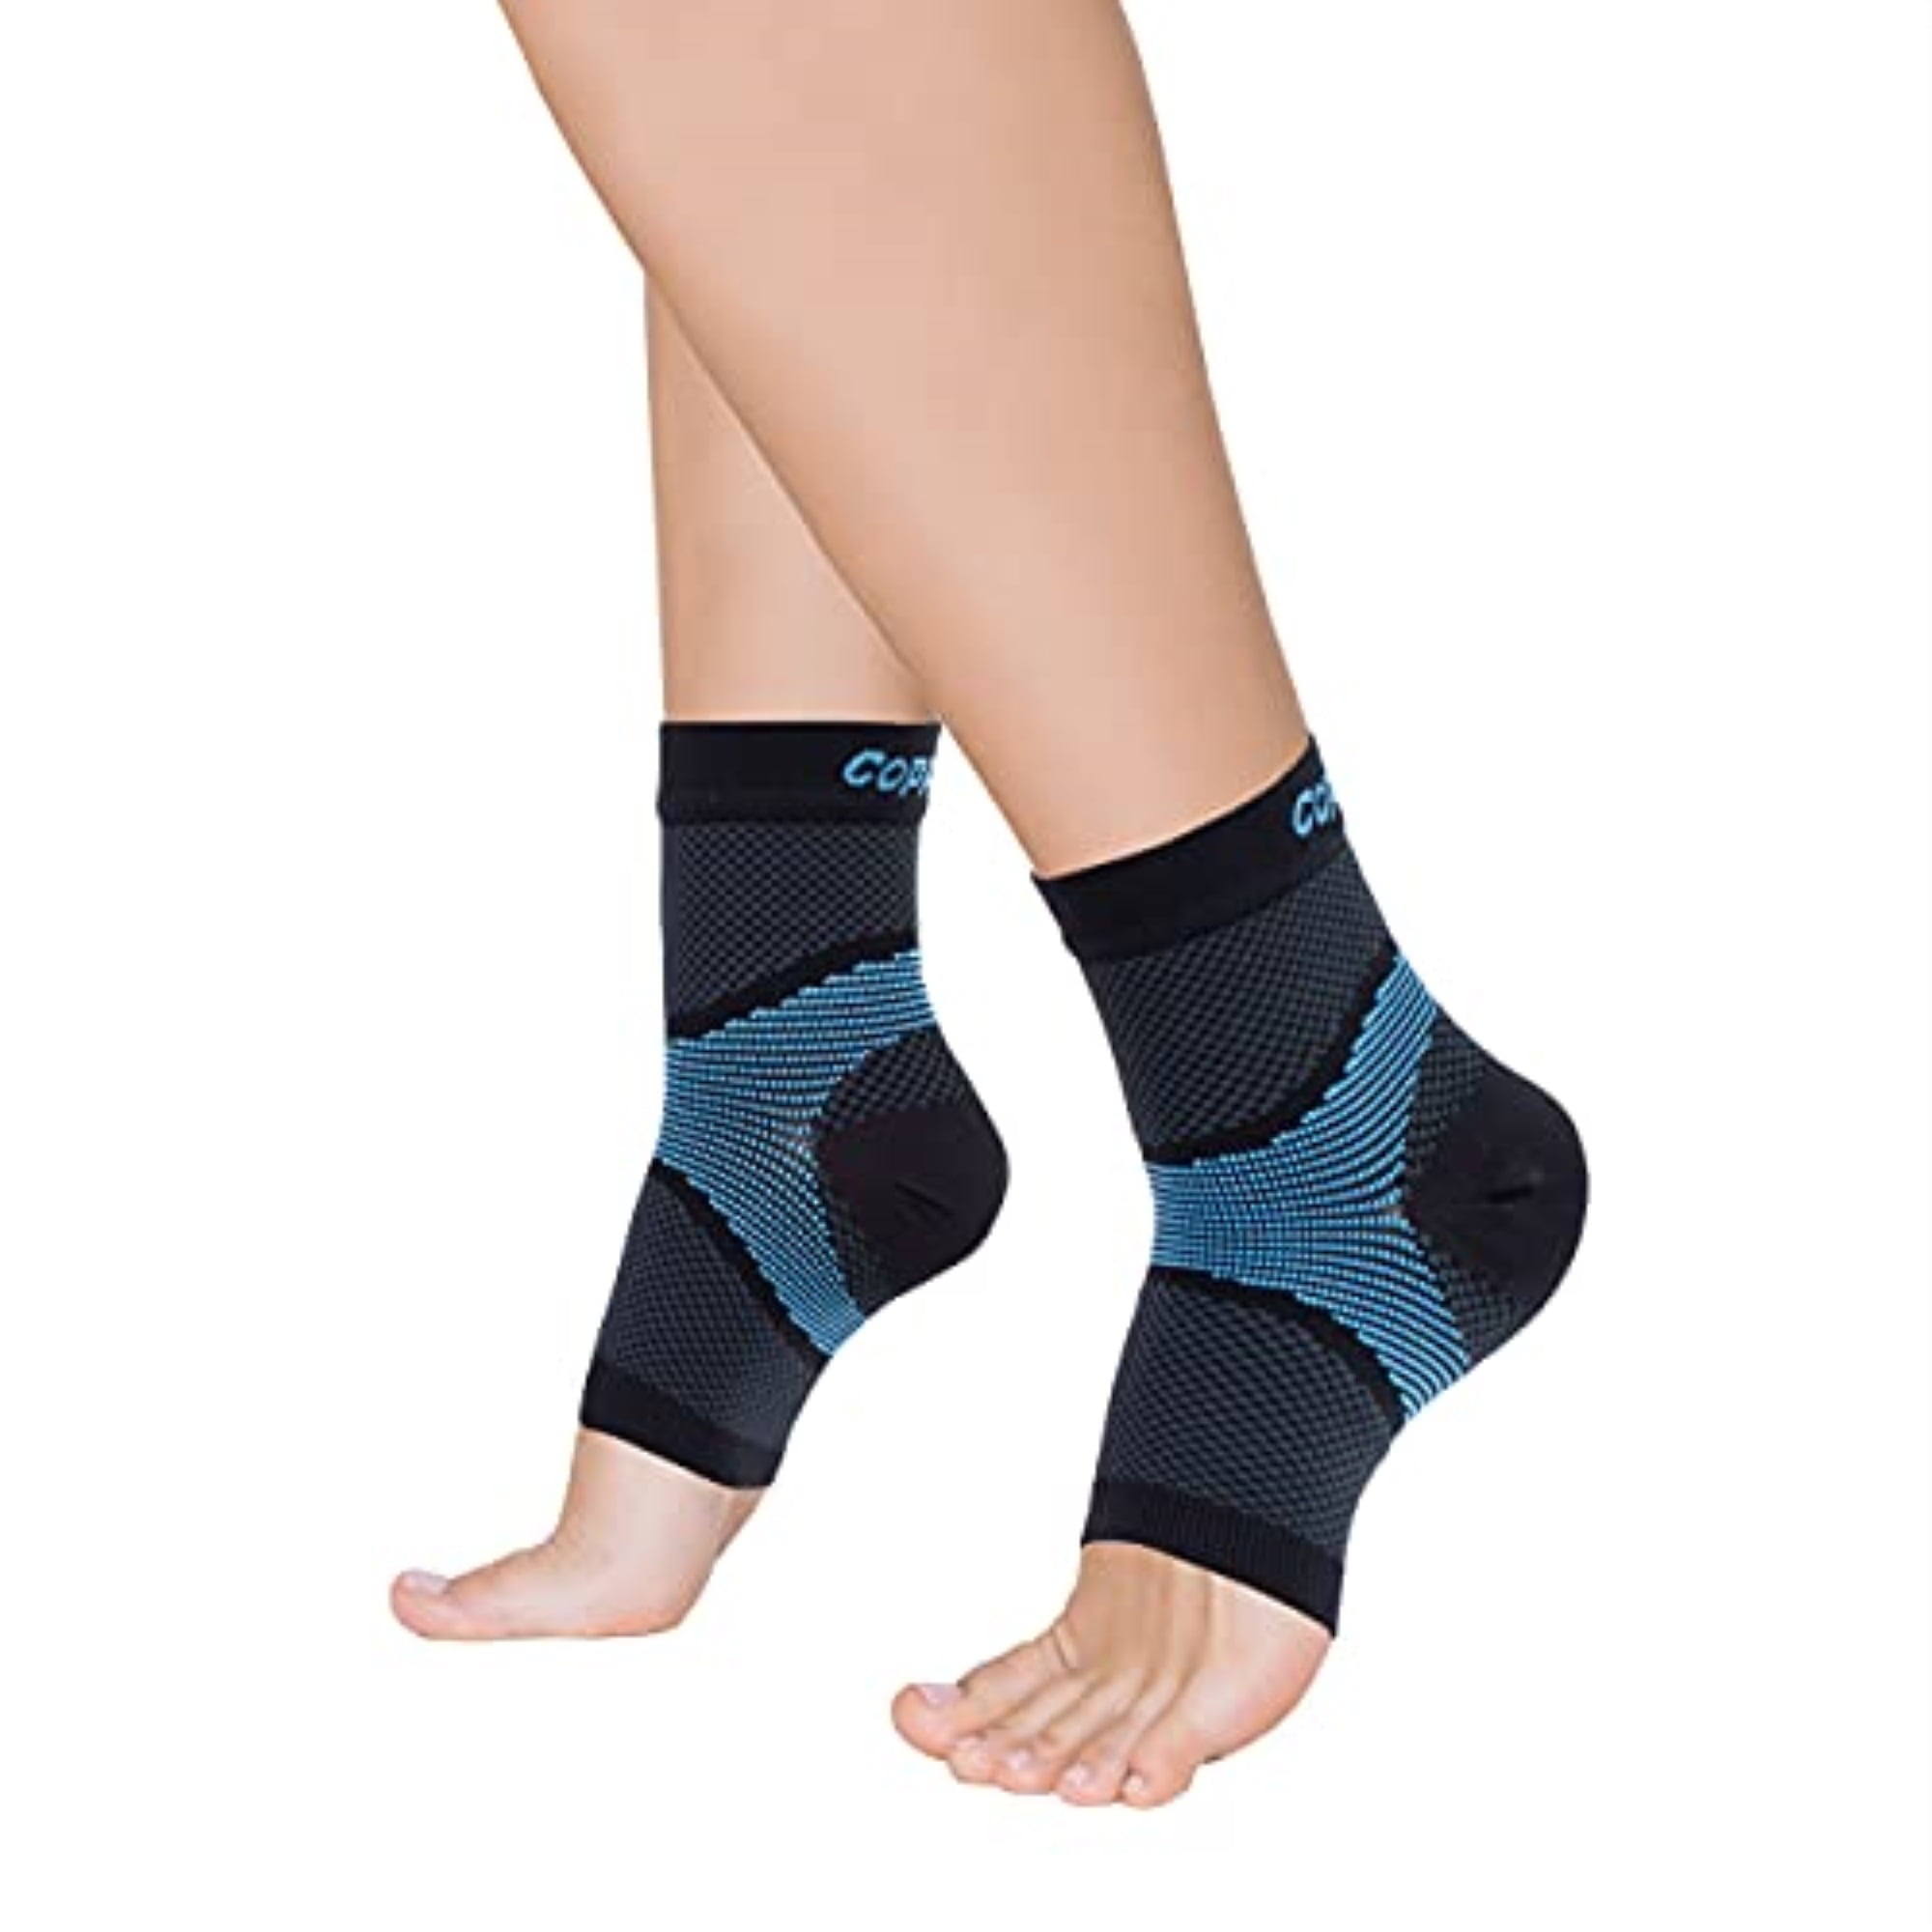 6016863 FOOT COMP SLEEVE L/XL Copper Fit ICE Black/Blue Basic Foot Compression Sleeve 1 box 2 ct (Pack of 1)